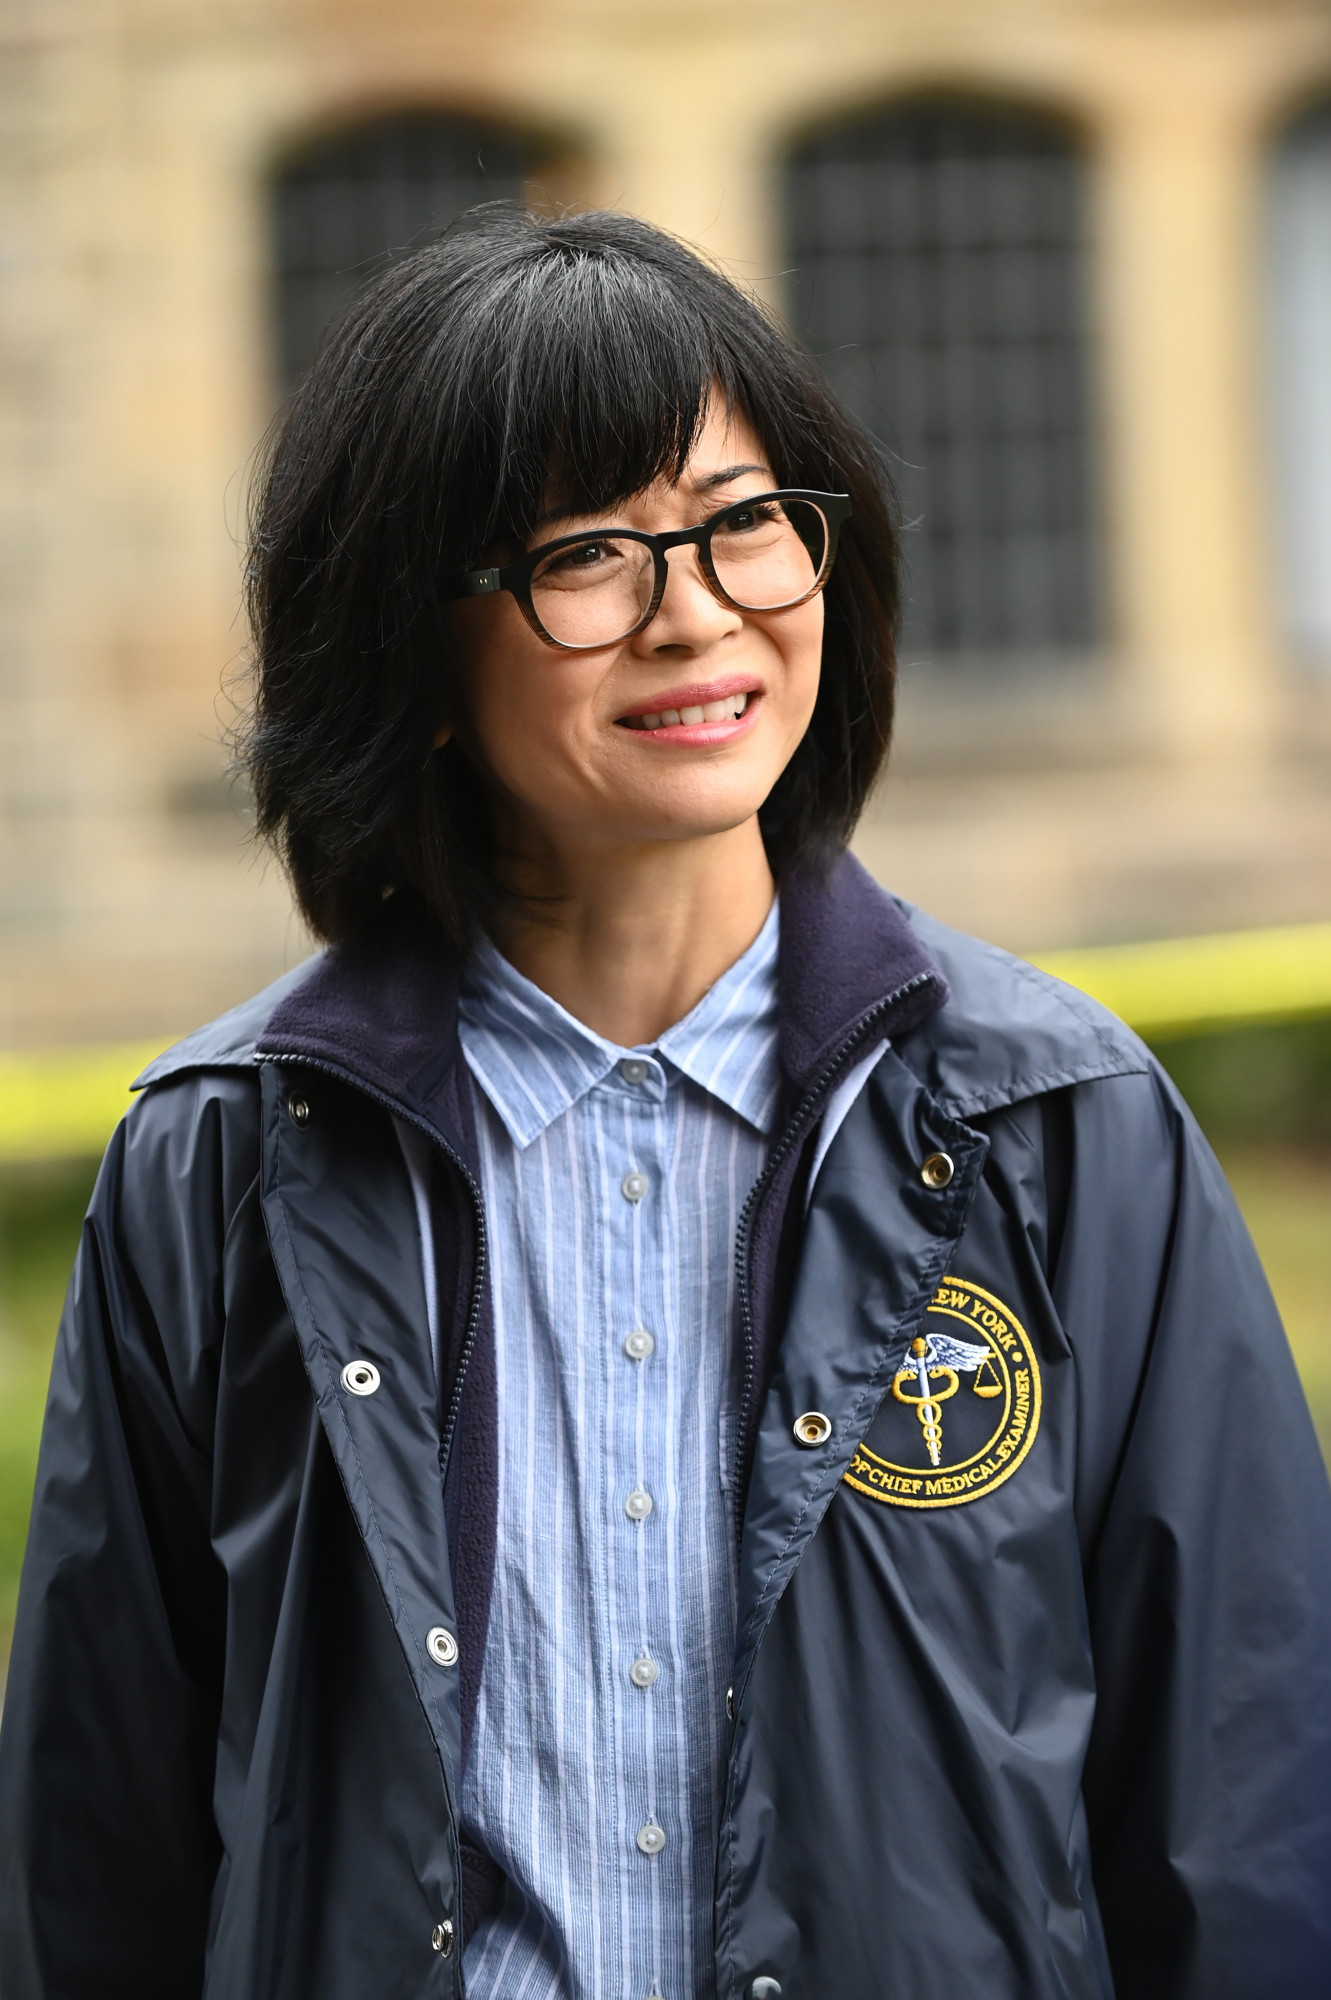 PRODIGAL SON: Keiko Agena in the "It's All In The Execution" season two premiere episode of PRODIGAL SON airing Tuesday, Jan. 12 (9:01-10:00 PM ET/PT) on FOX.  ©2020 Fox Media LLC Cr:  Phil Caruso/FOX